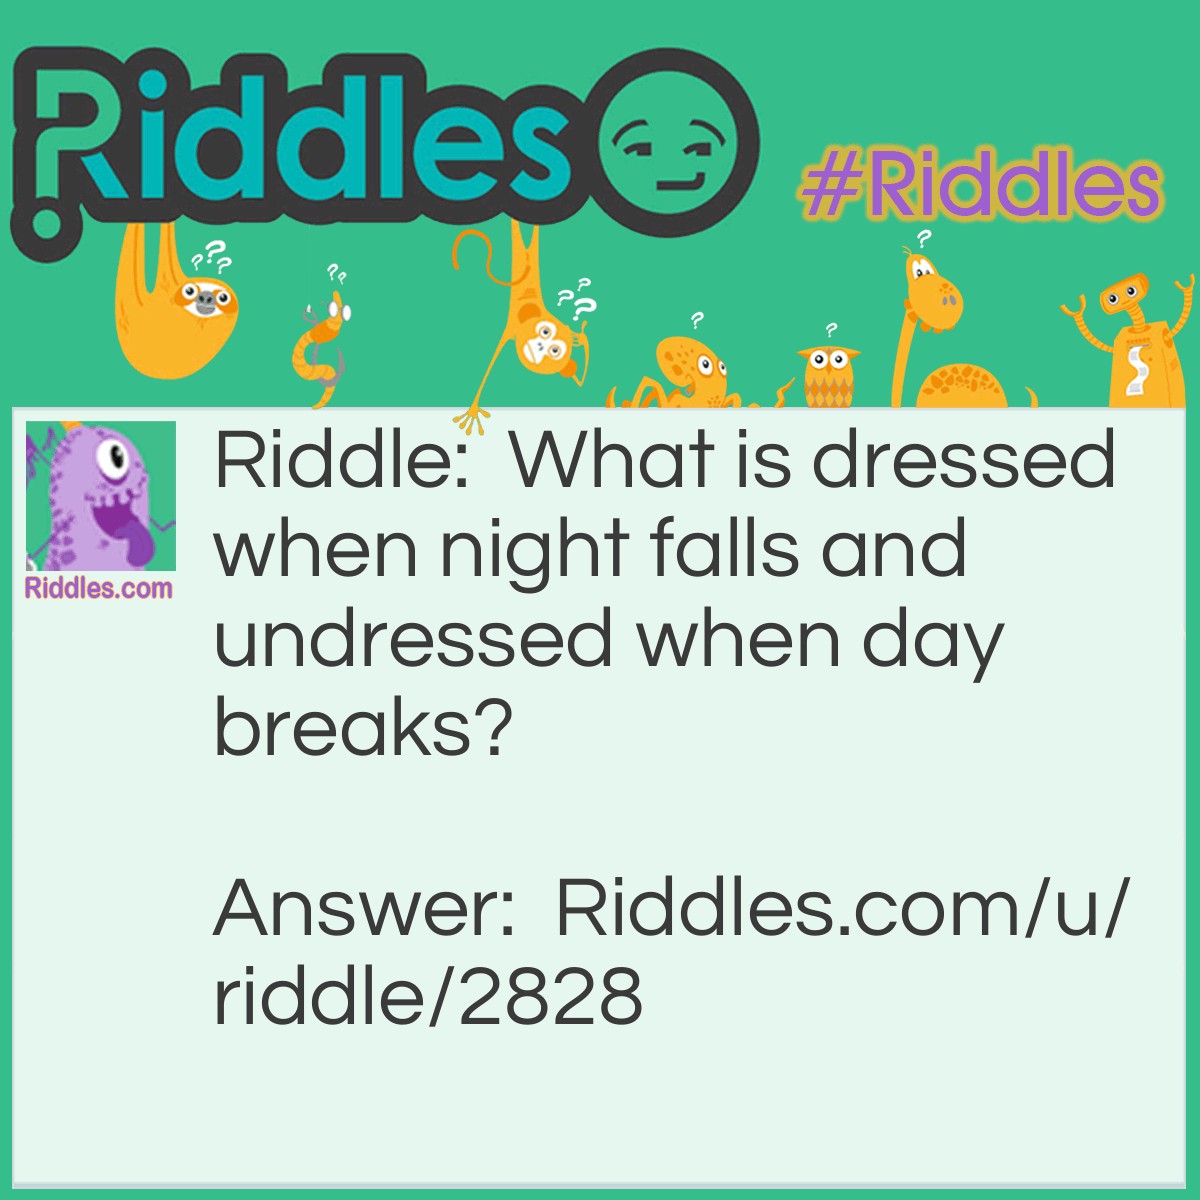 Riddle: What is dressed when night falls and undressed when day breaks? Answer: Fire.